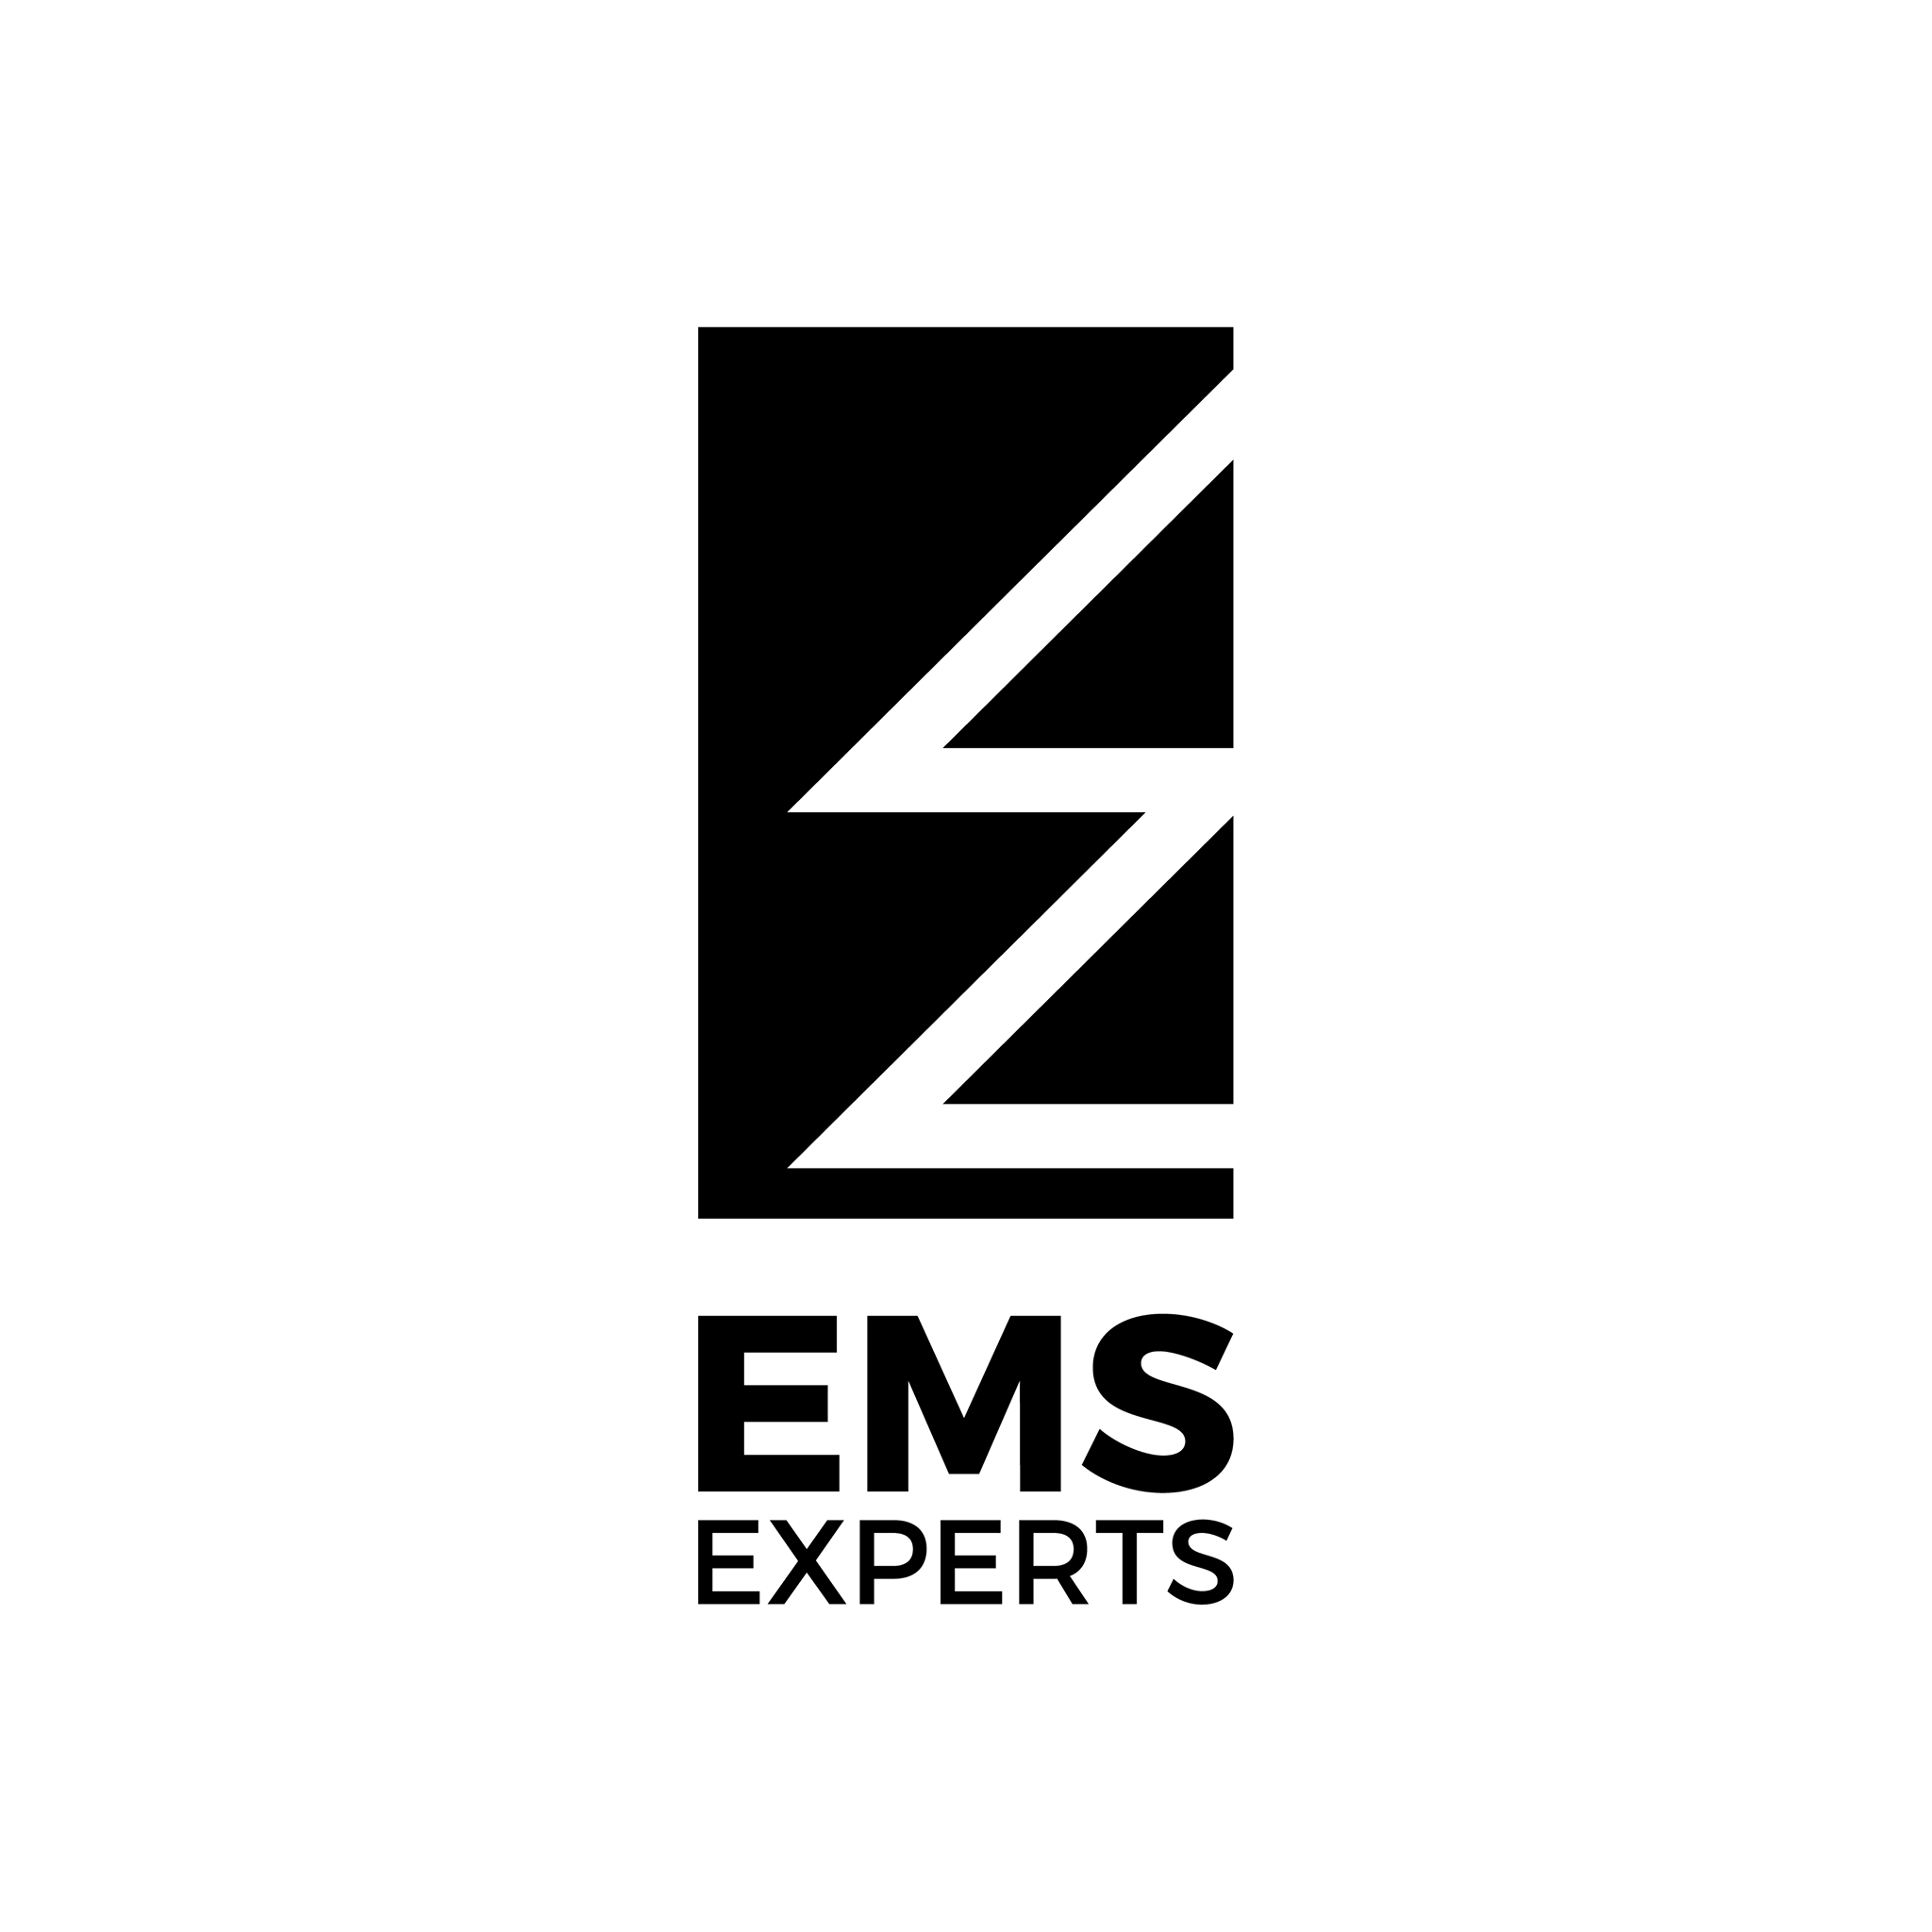 EMS EXPERTS